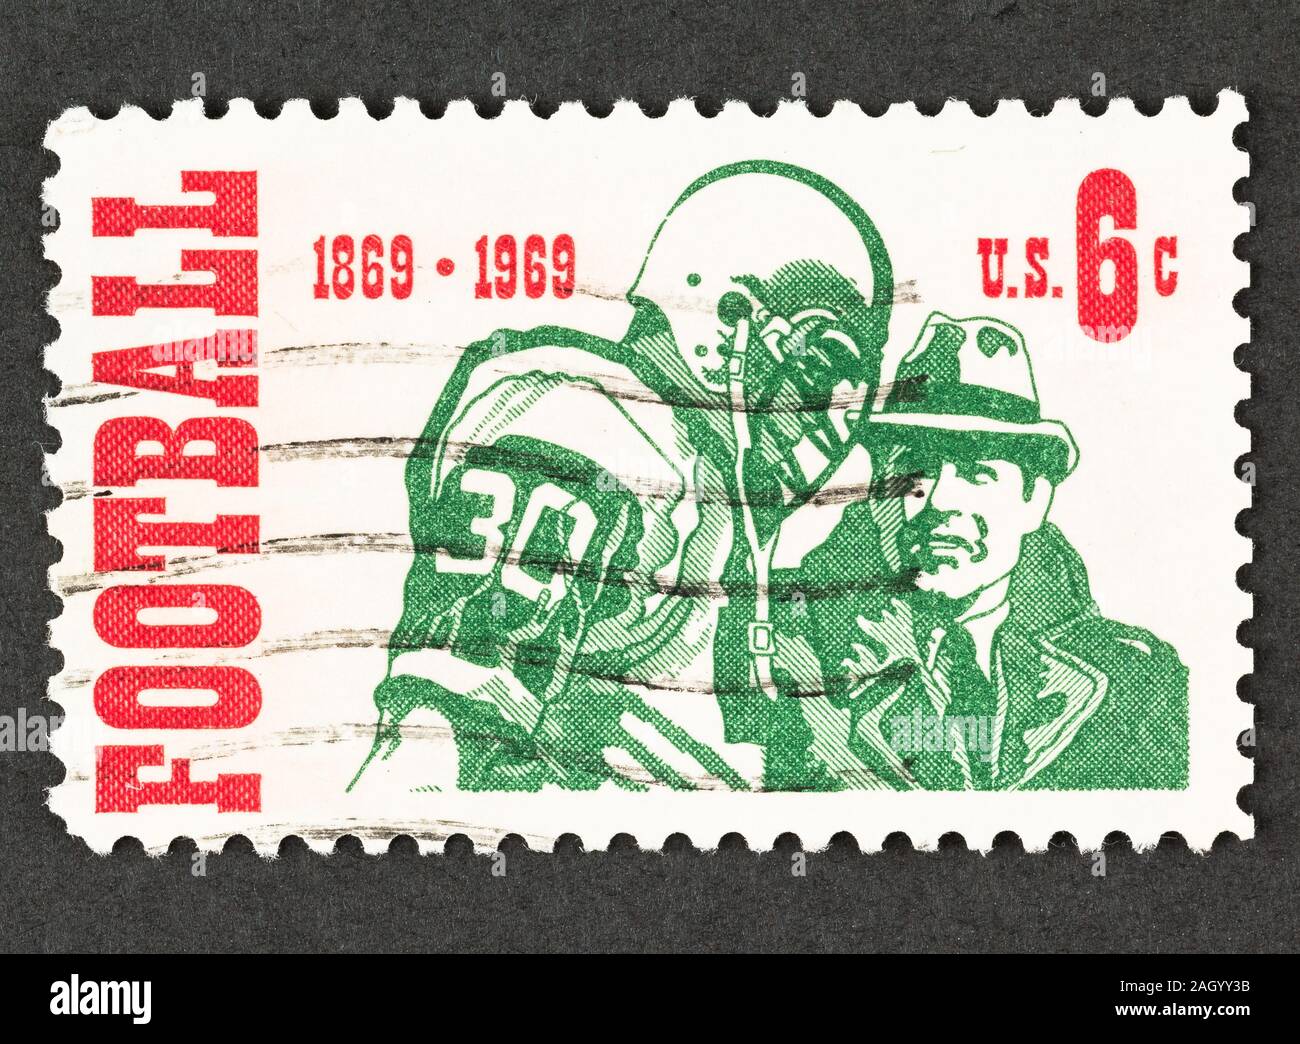 American 64 cent stamp commemorating 100th anniversary of Intercollegiate Football, issued in 1969, Scott # 1382. Stamp depicts a coach with player. Stock Photo